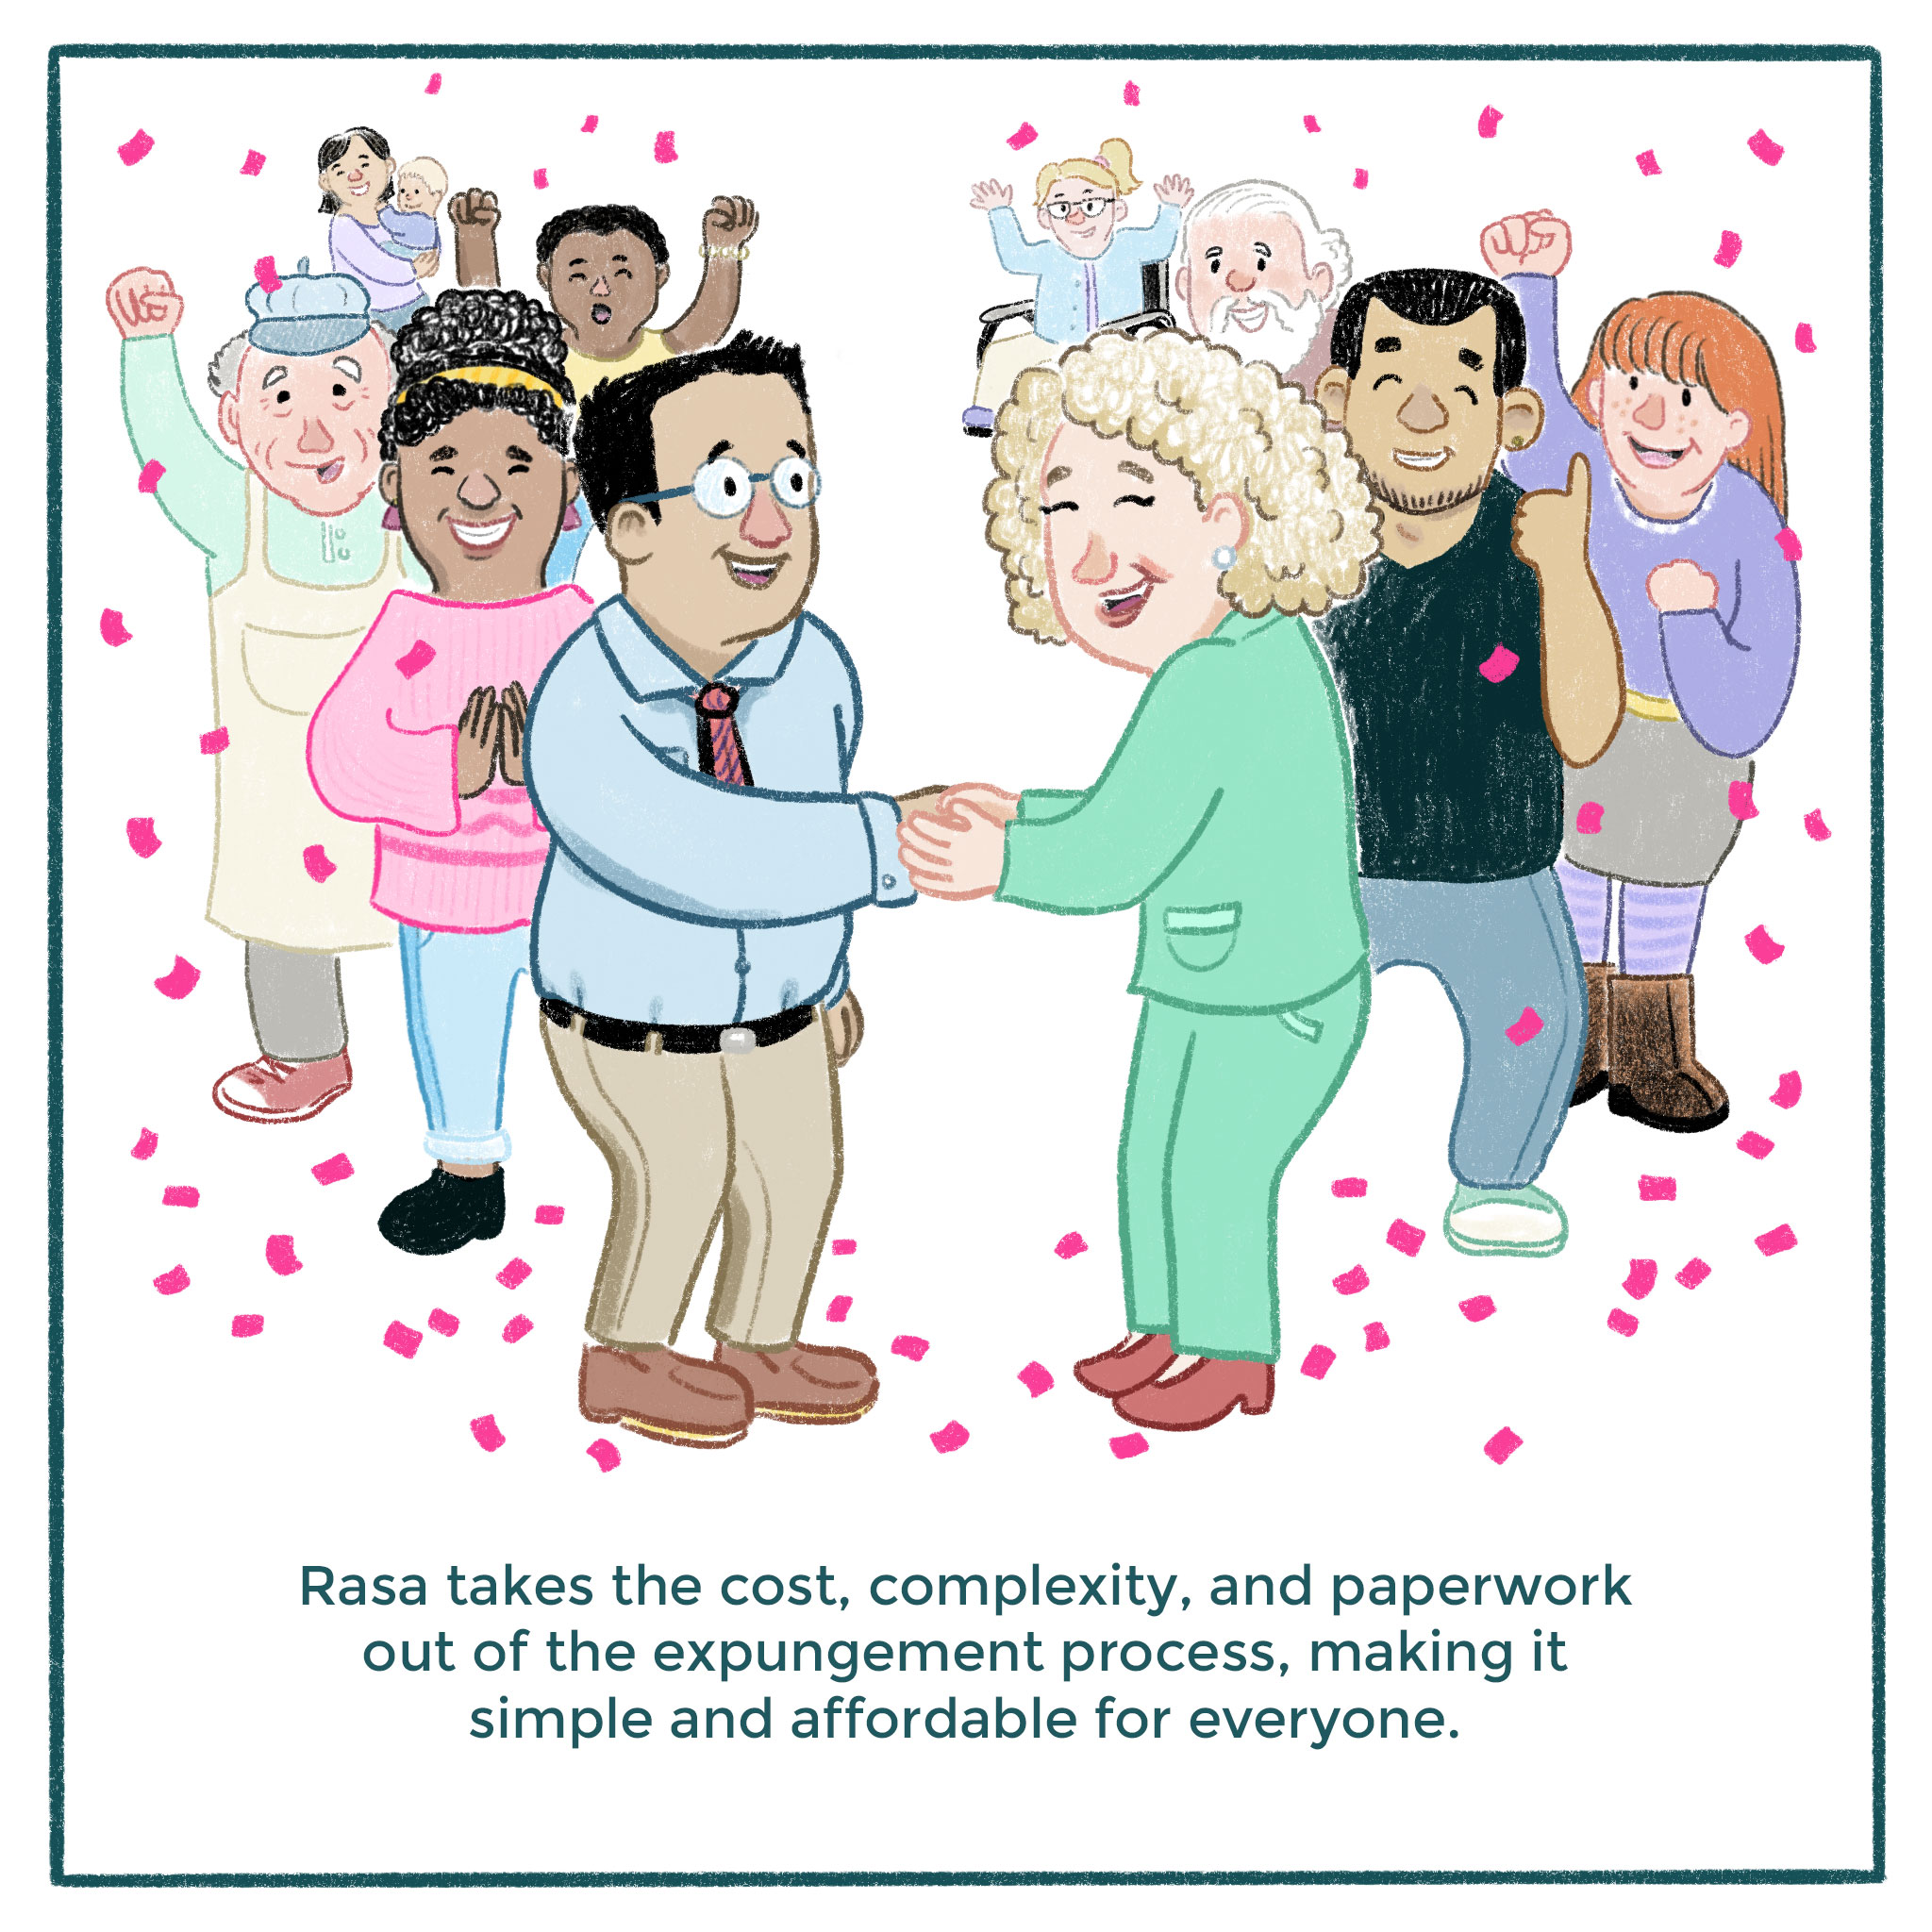 10. Image: Illustration of a man celebrating with others. Text: Rasa takes the cost, complexity, and paperwork out of the expungement process, making it simple and affordable for everyone.